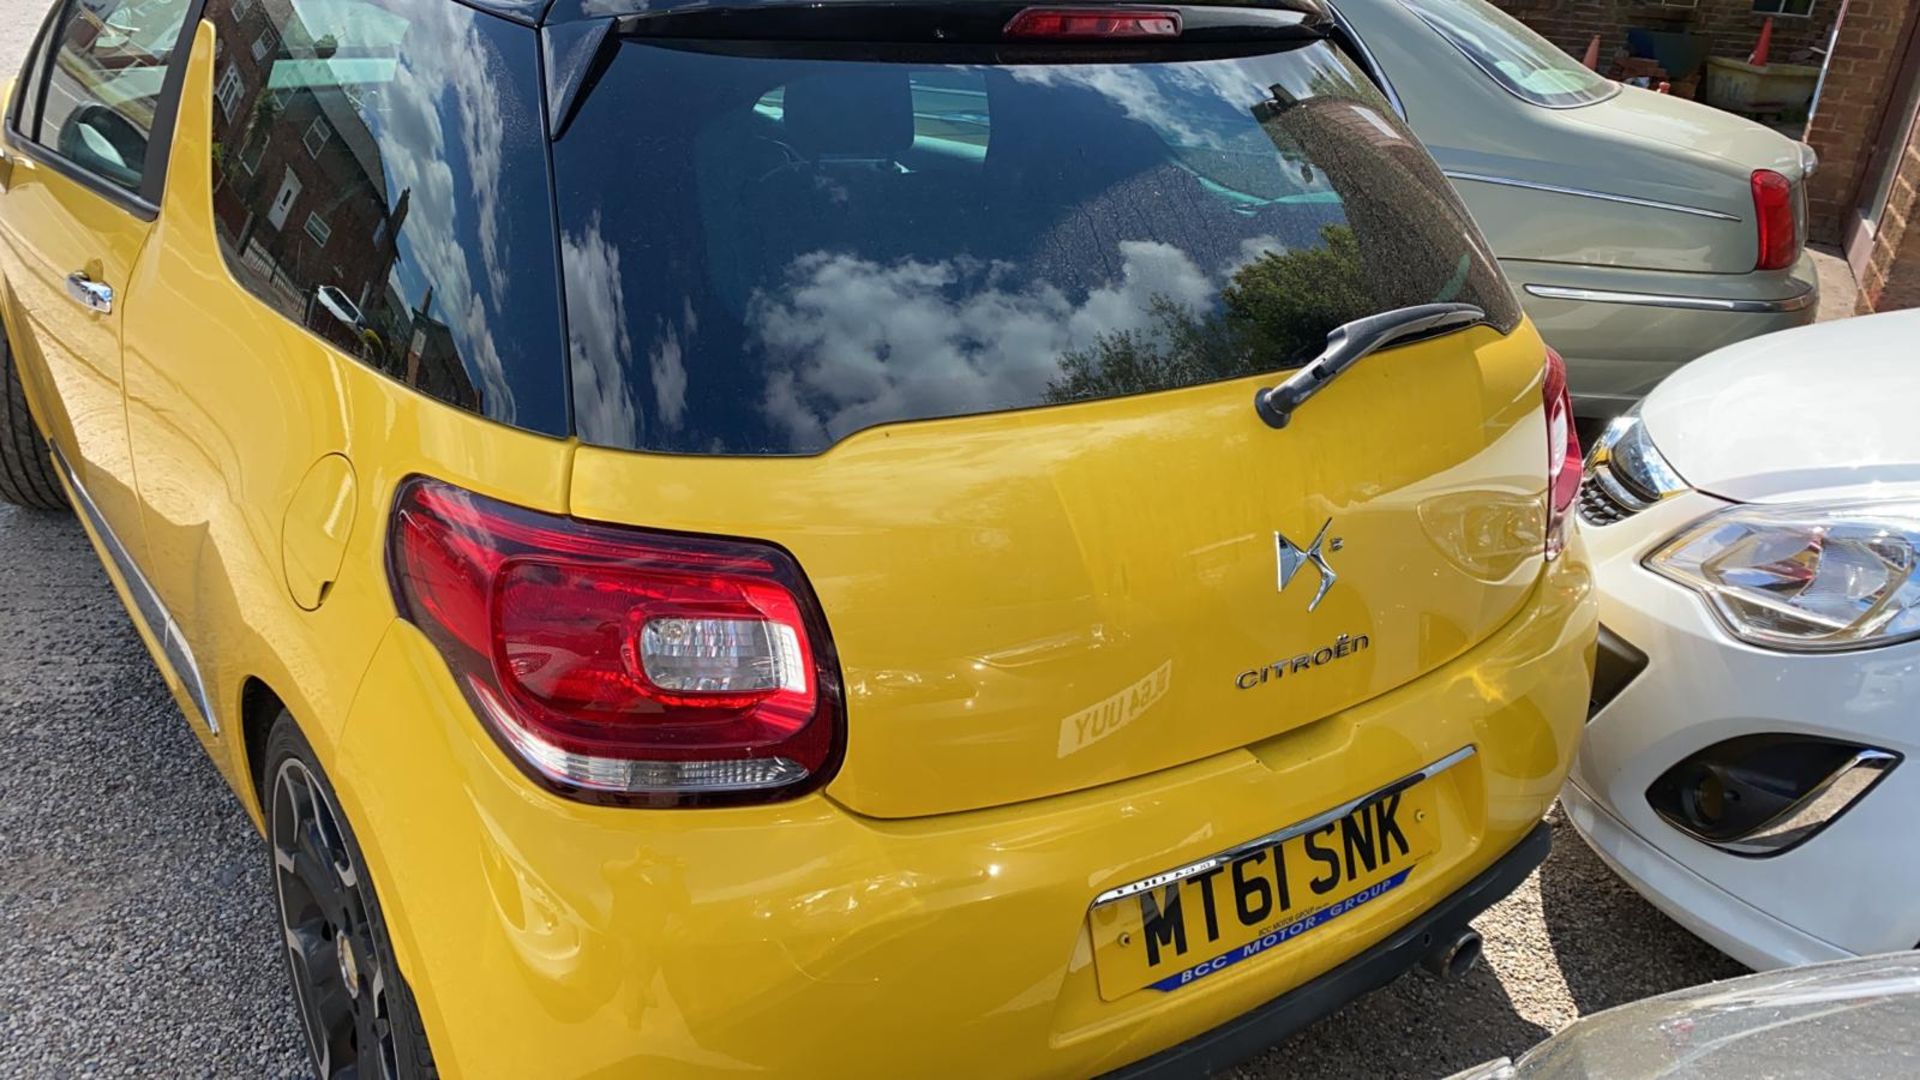 2011/61 REG CITROEN DS3 DSTYLE + E-HDI 1.6 DIESEL 3 DOOR HATCHBACK YELLOW, SHOWING 1 FORMER KEEPER - Image 4 of 6